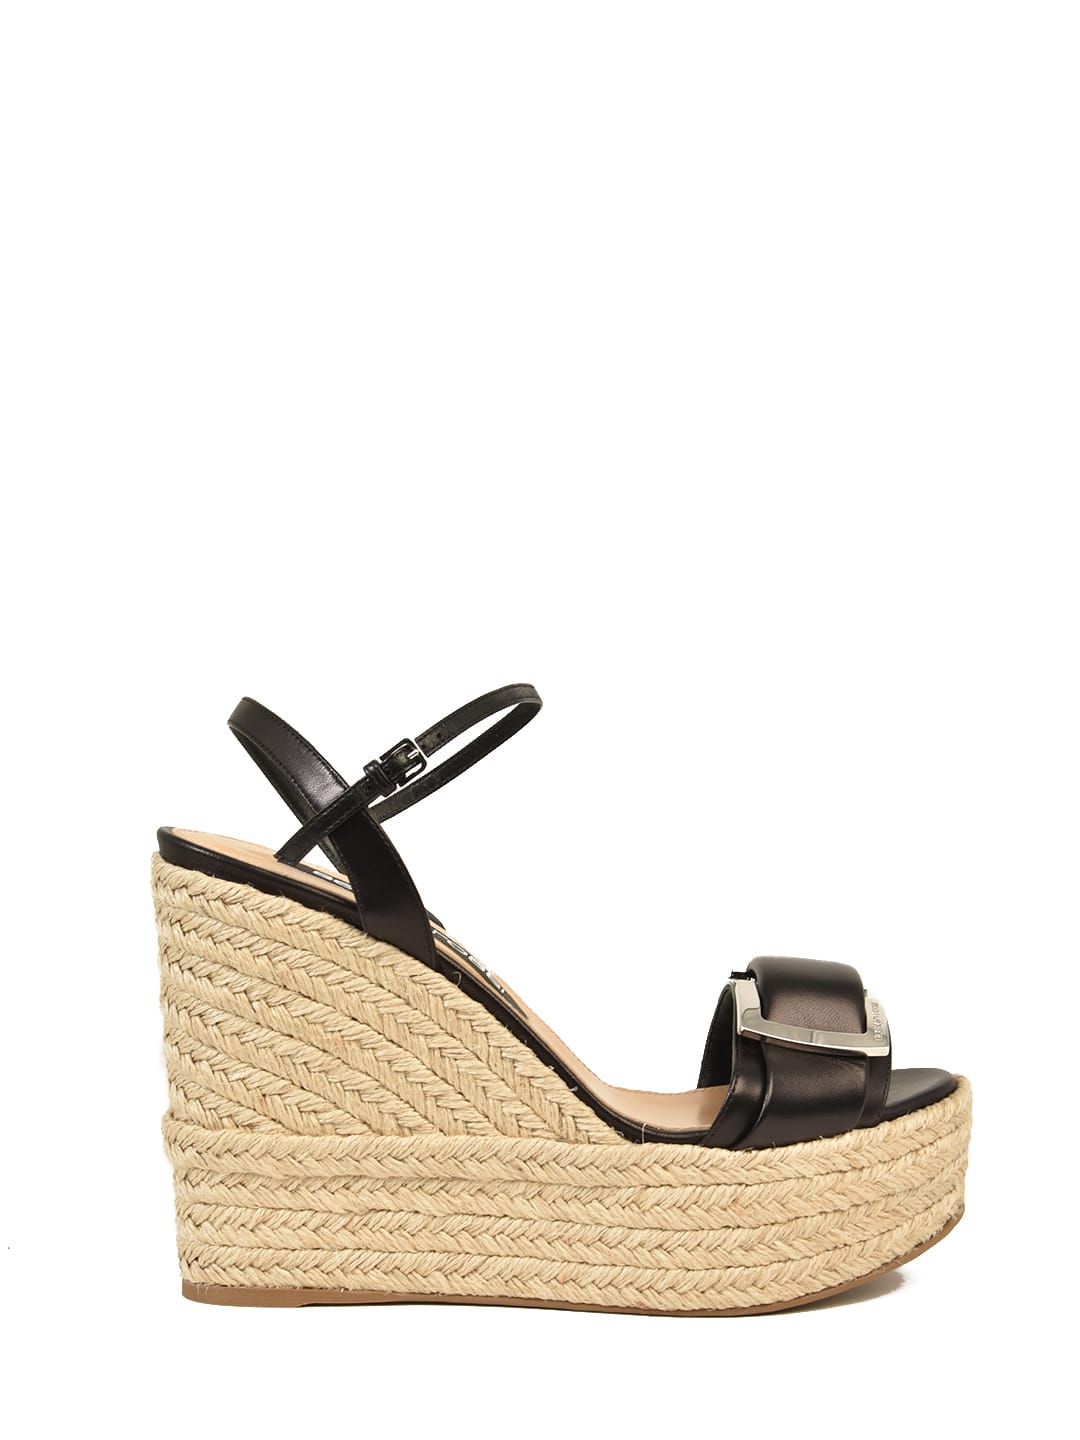 SERGIO ROSSI SANDAL WITH ROPE,11213363